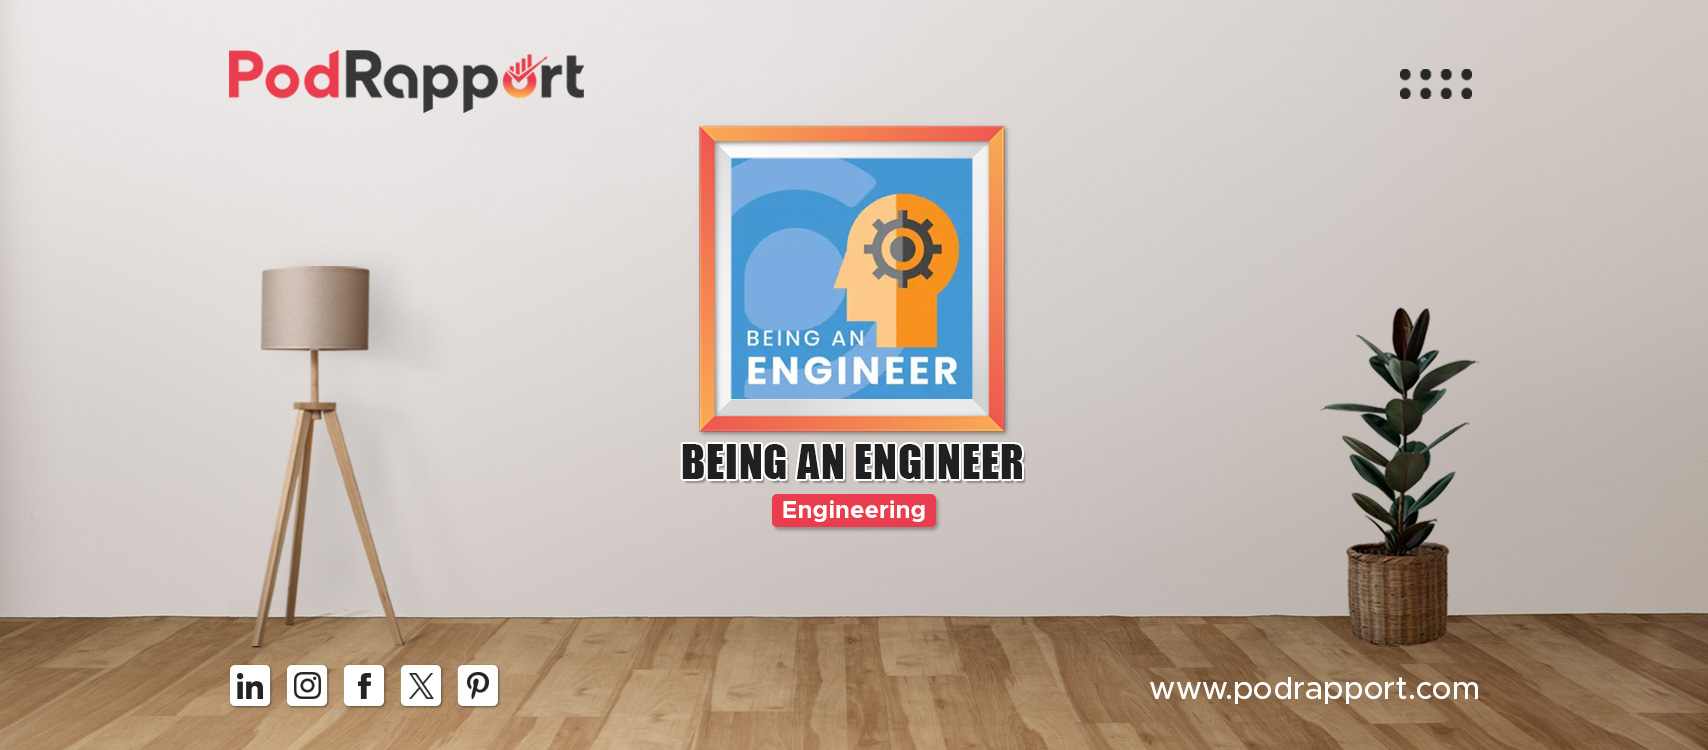 Being an Engineer